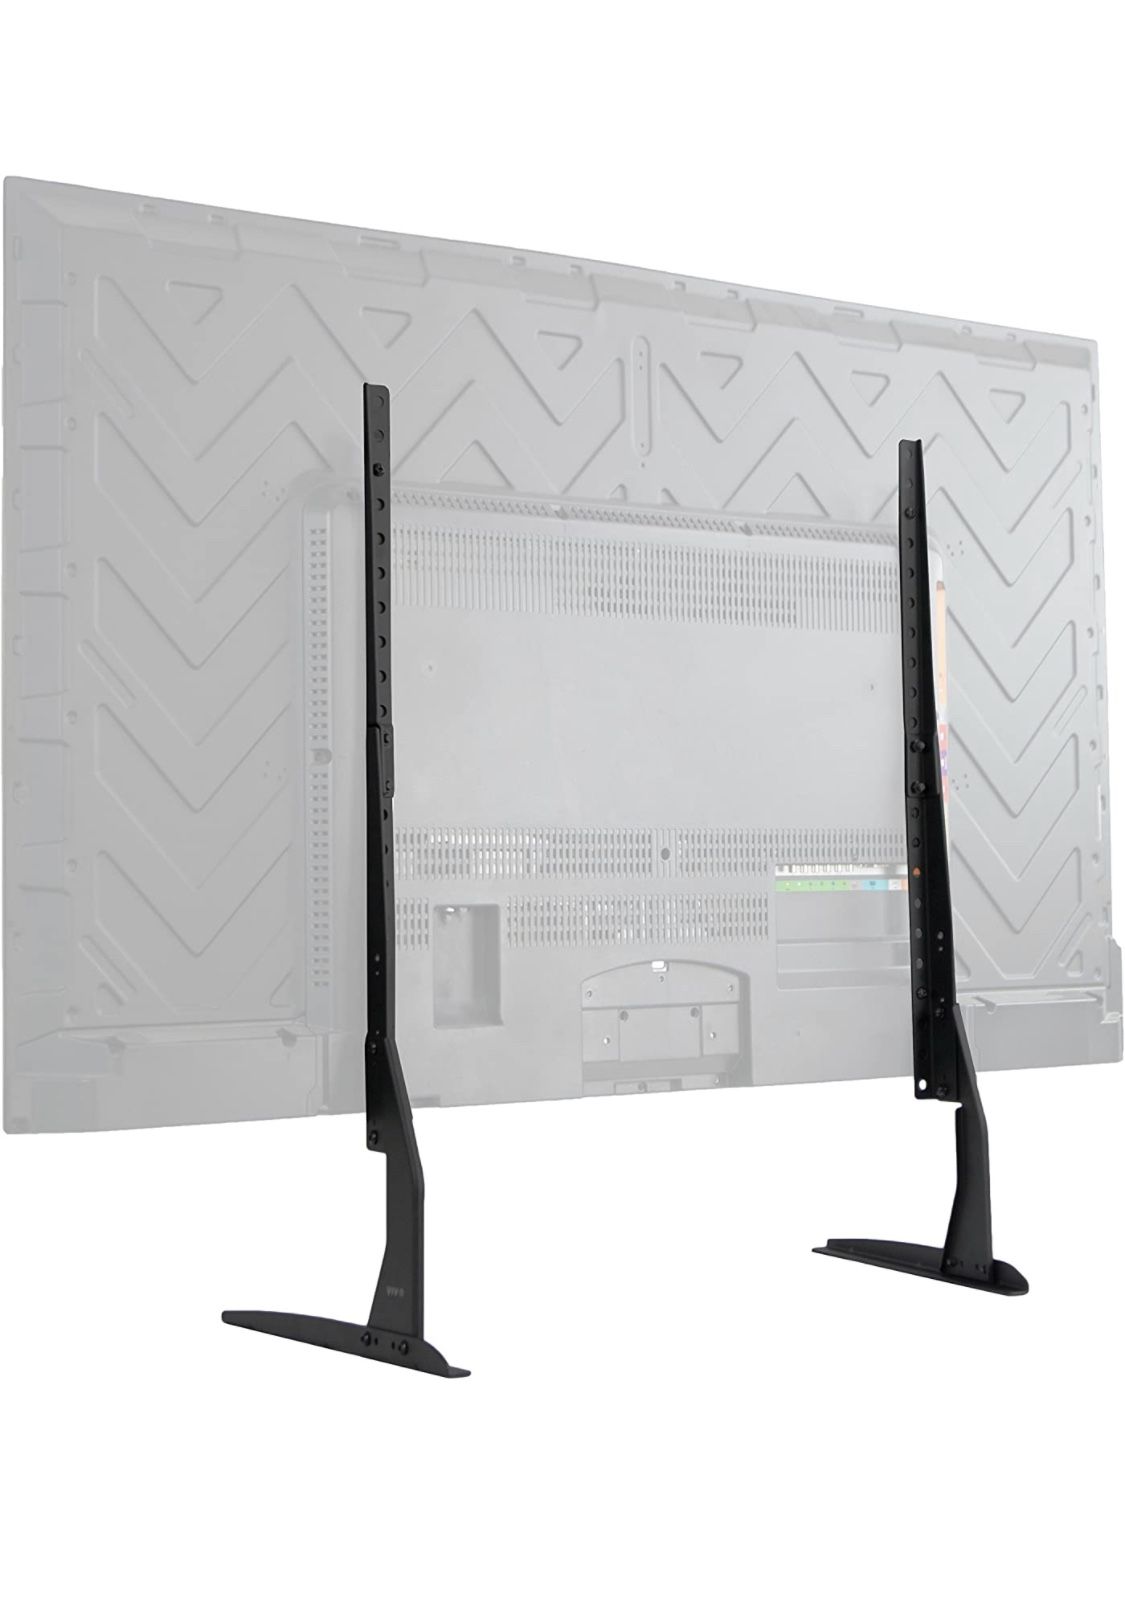 Universal table stand for flat screen LCD televisions from 27 to 60 inches T.V.